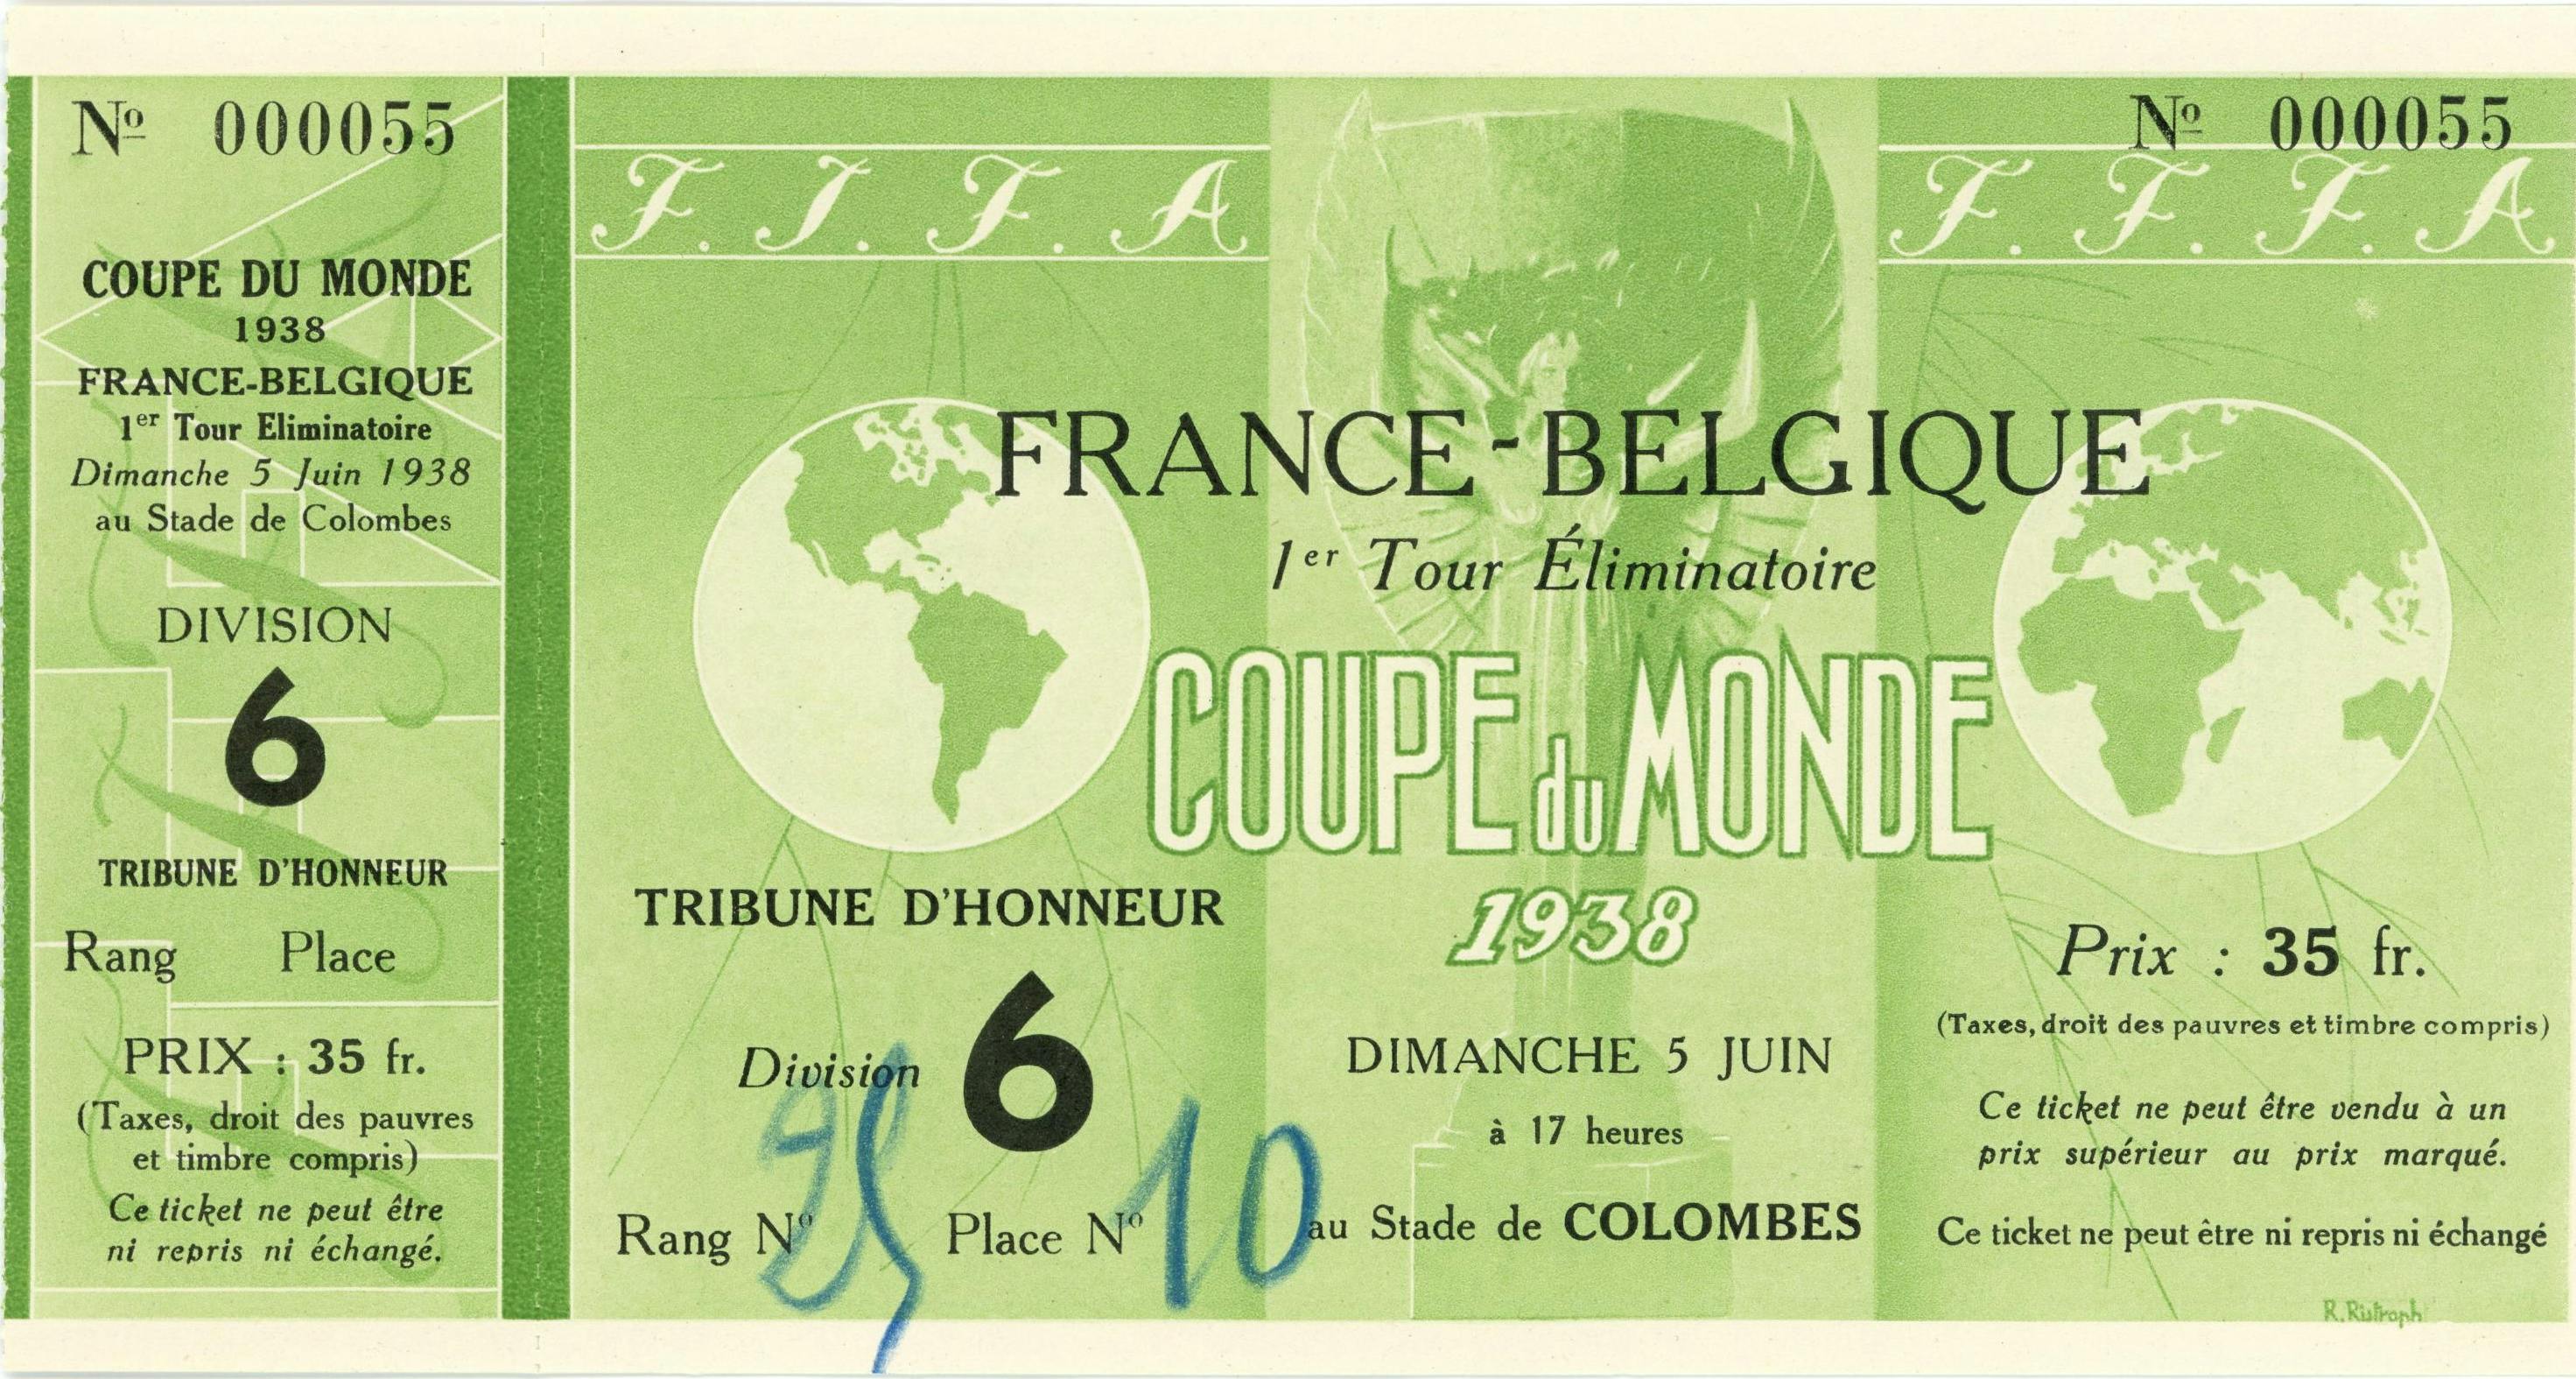 1938 FIFA World Cup ticket of match France-Belgium held at the Olympic Stadium in Colombes on June 5, 1938.© FIFA Museum, Zürich